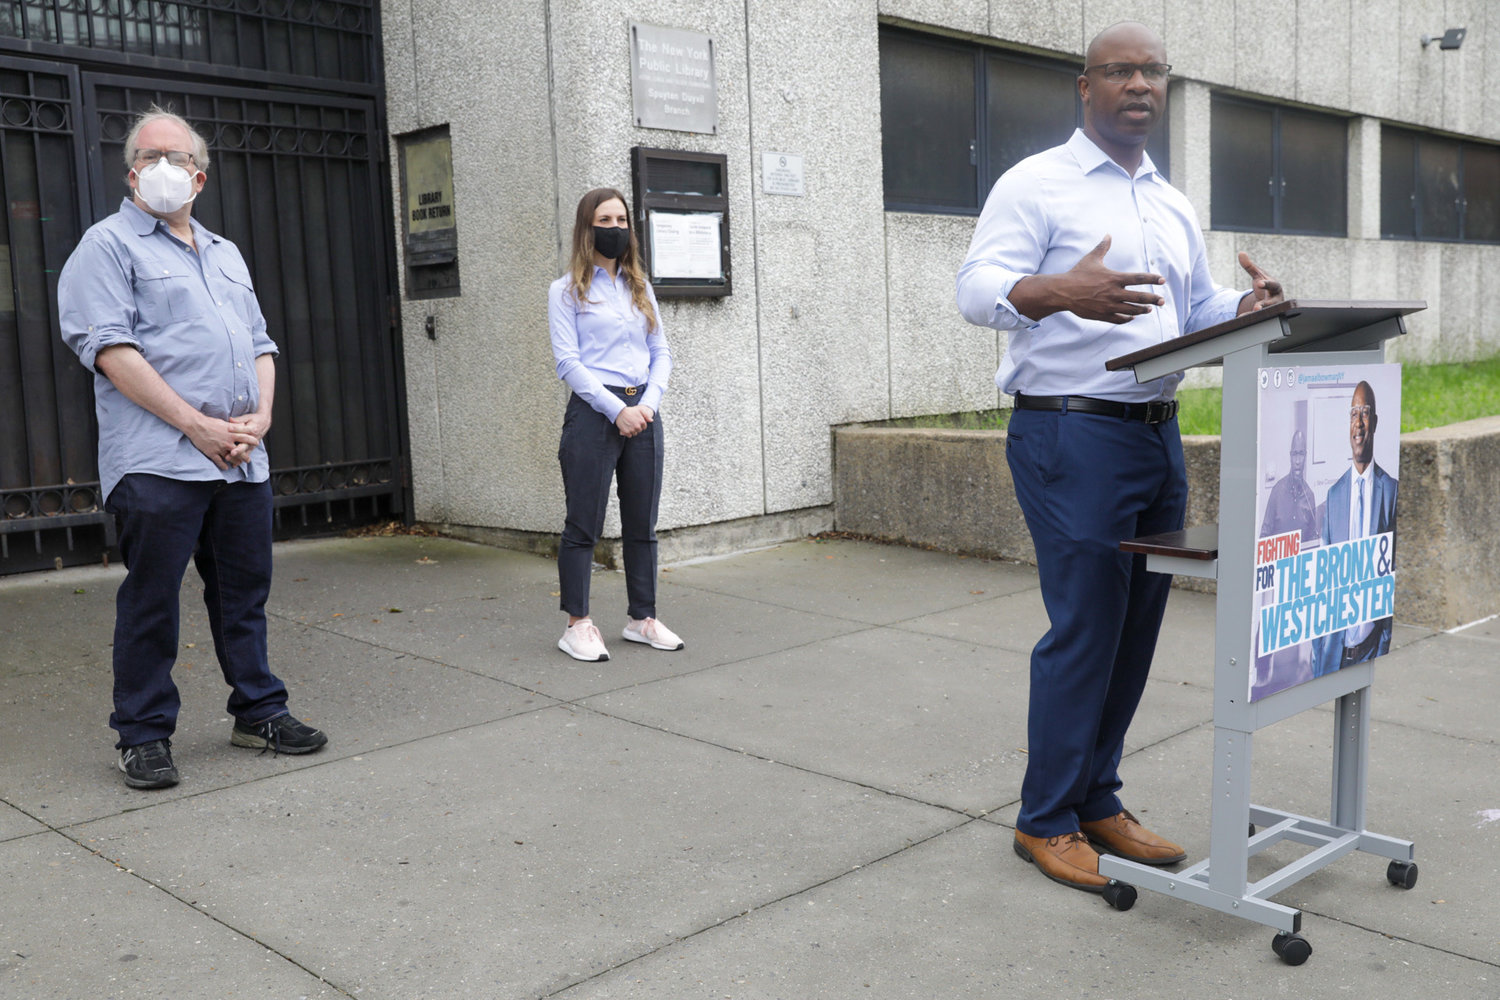 Jamaal Bowman speaks in front of the Spuyten Duyvil Library on Friday morning, after receiving endorsements from state Sen. Alessandra Biaggi and city comptroller Scott Stringer in his run for congress.